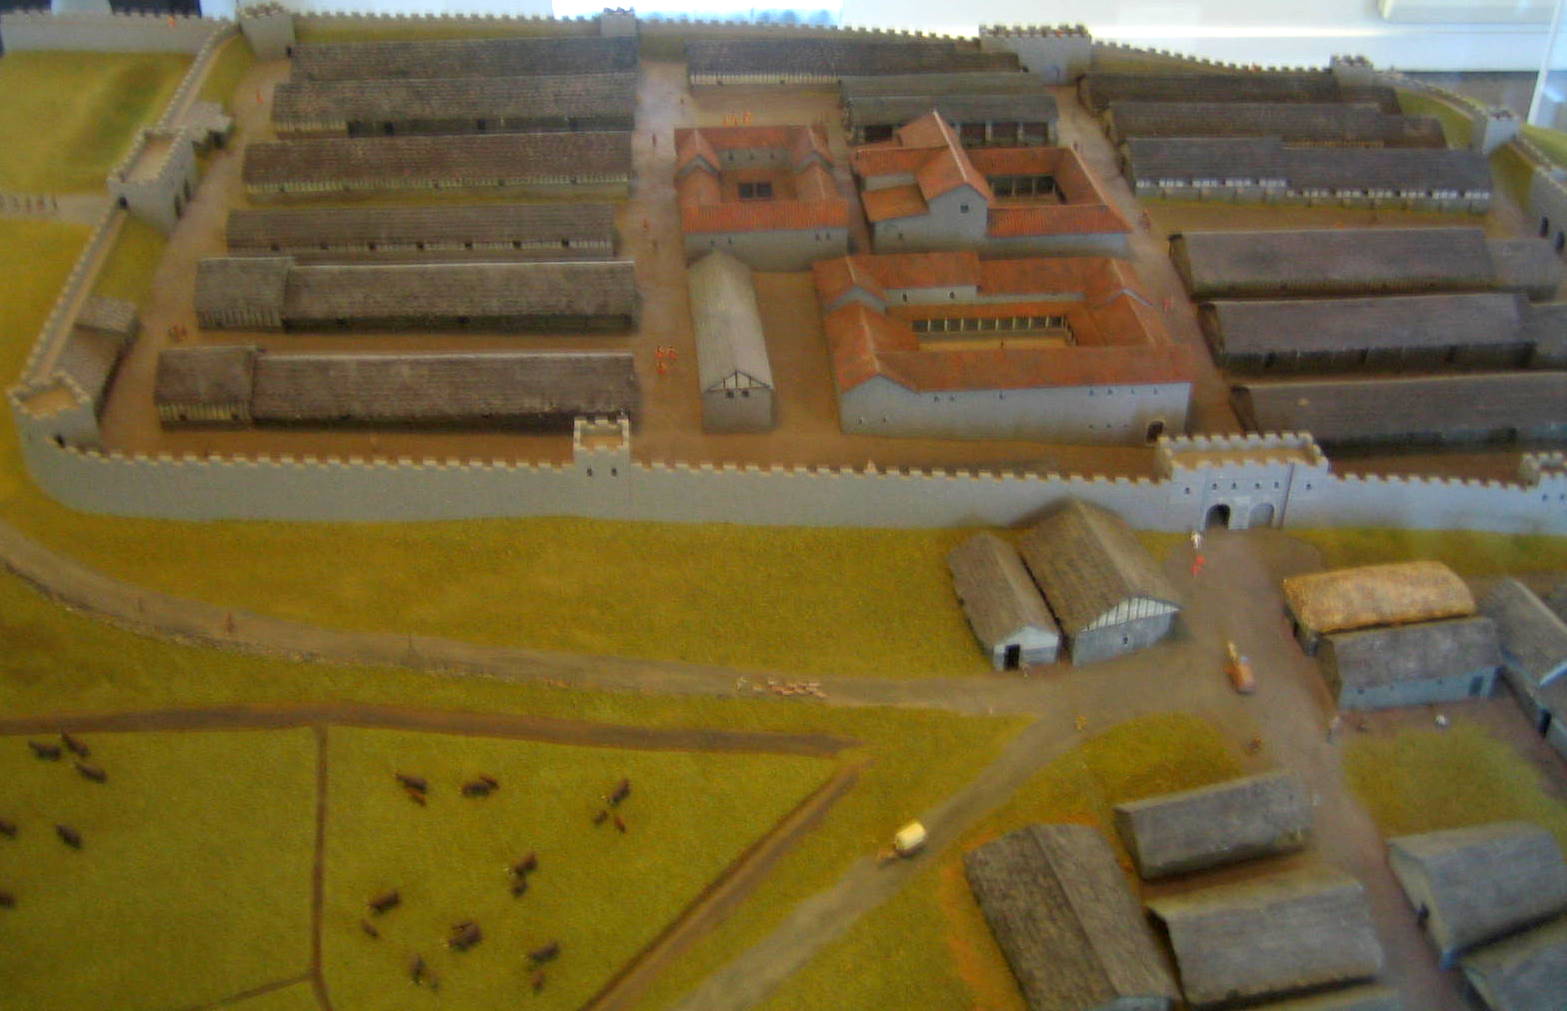 Fort model in the museum